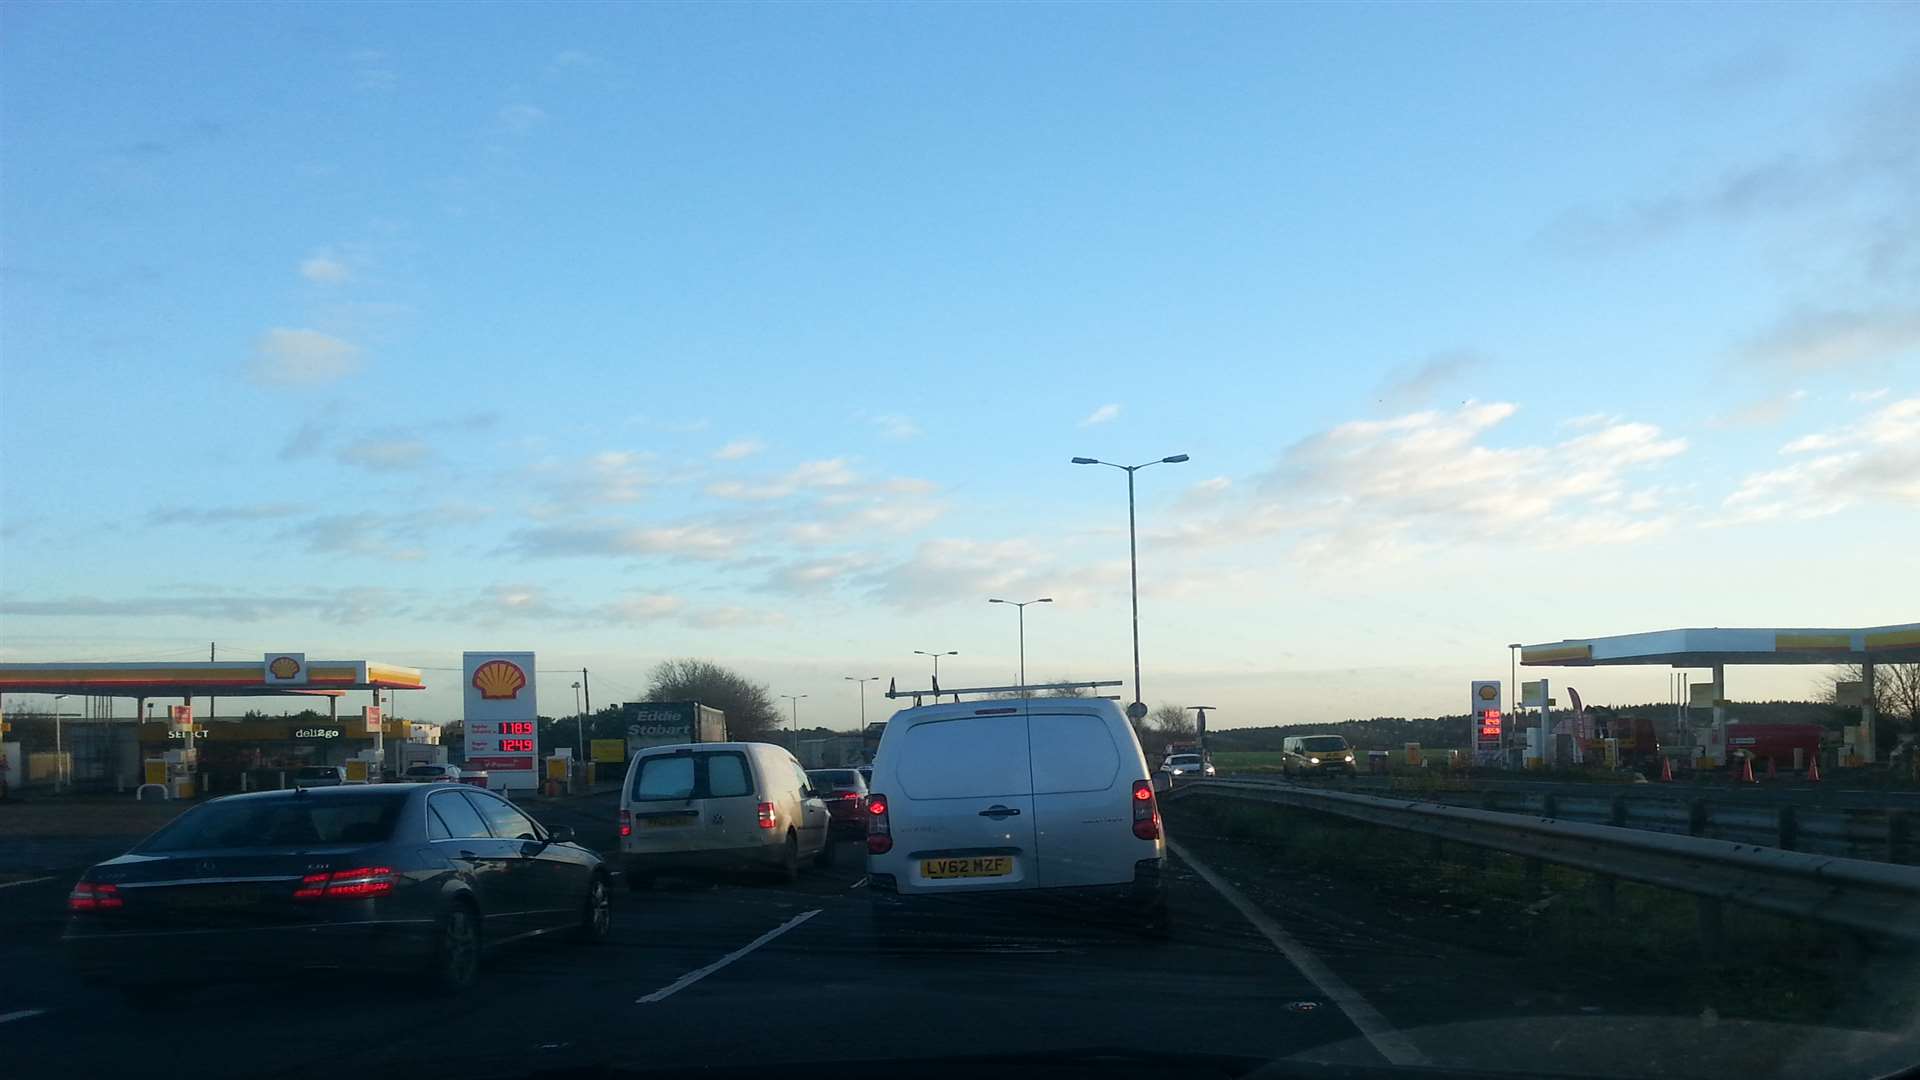 Traffic is queuing on the A249 this morning as a result of the incident